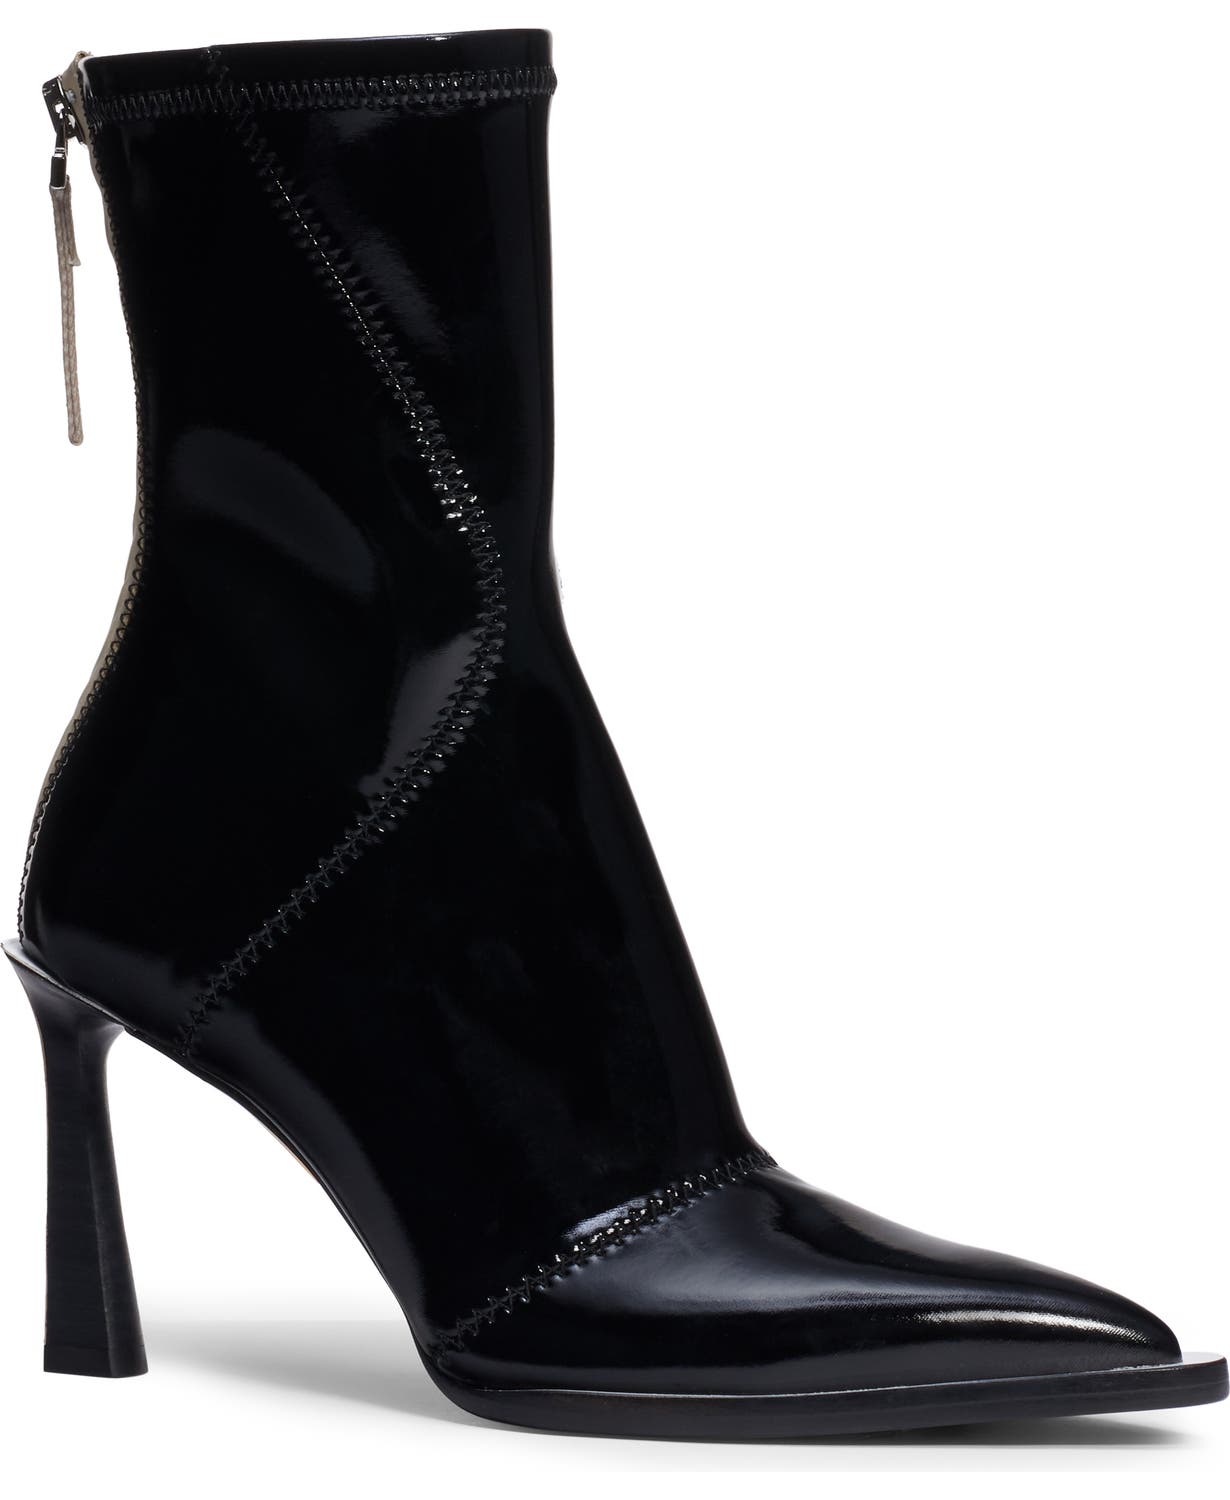 www.couturepoint.com-fendi-womens-black-tronchetto-pointed-toe-boots